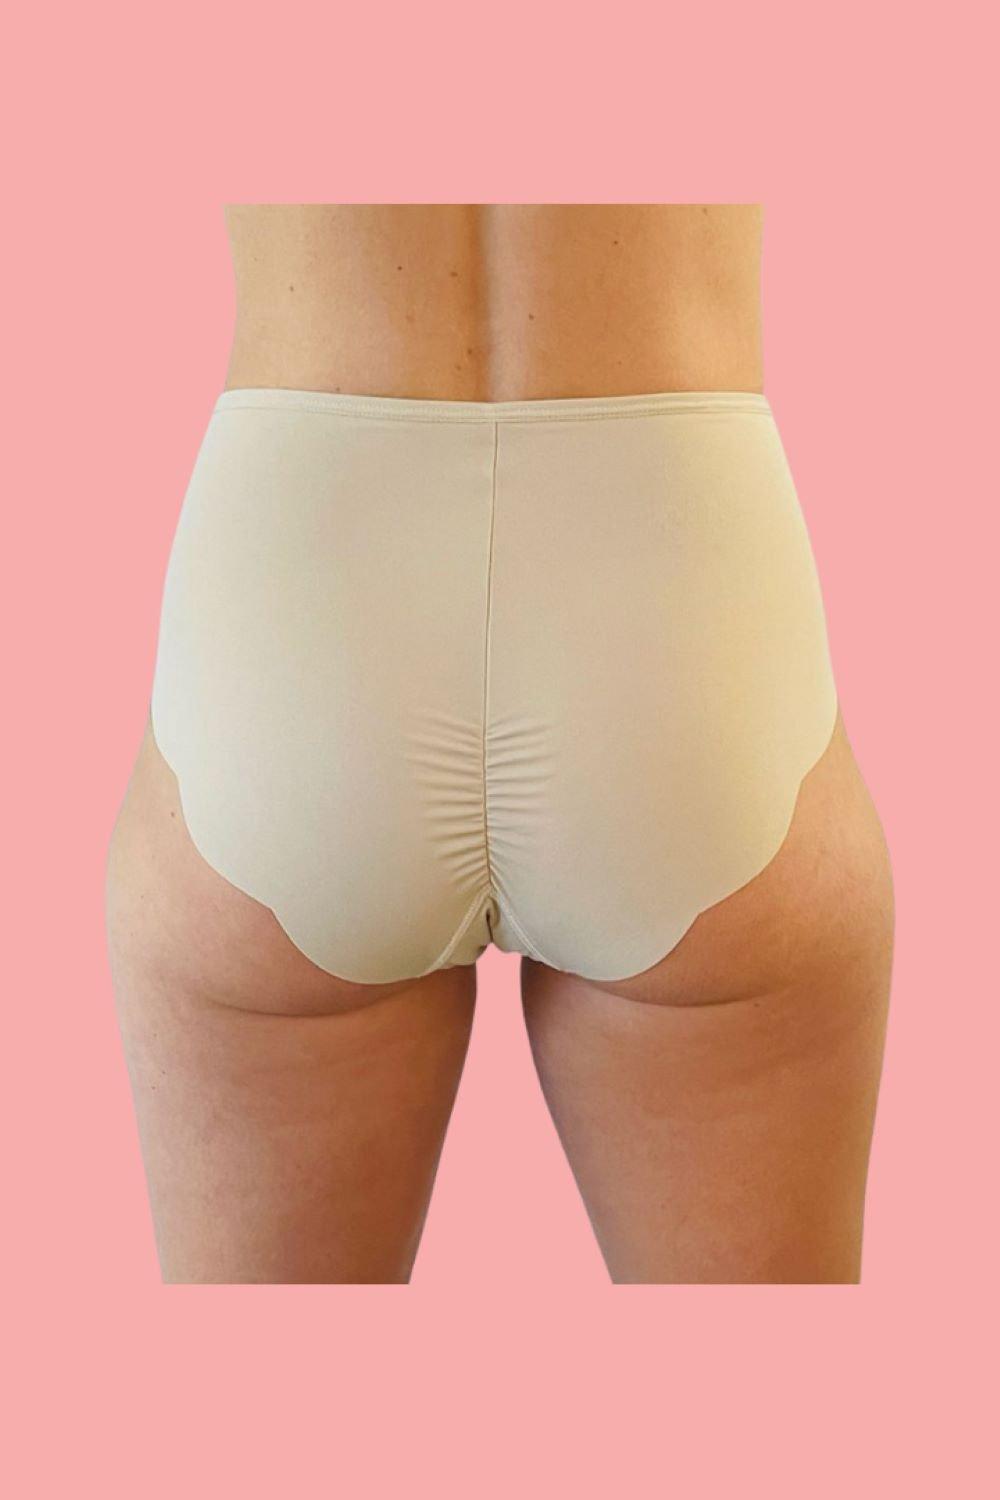 Washable Incontinence Period Knickers Coni Sporty High Waist